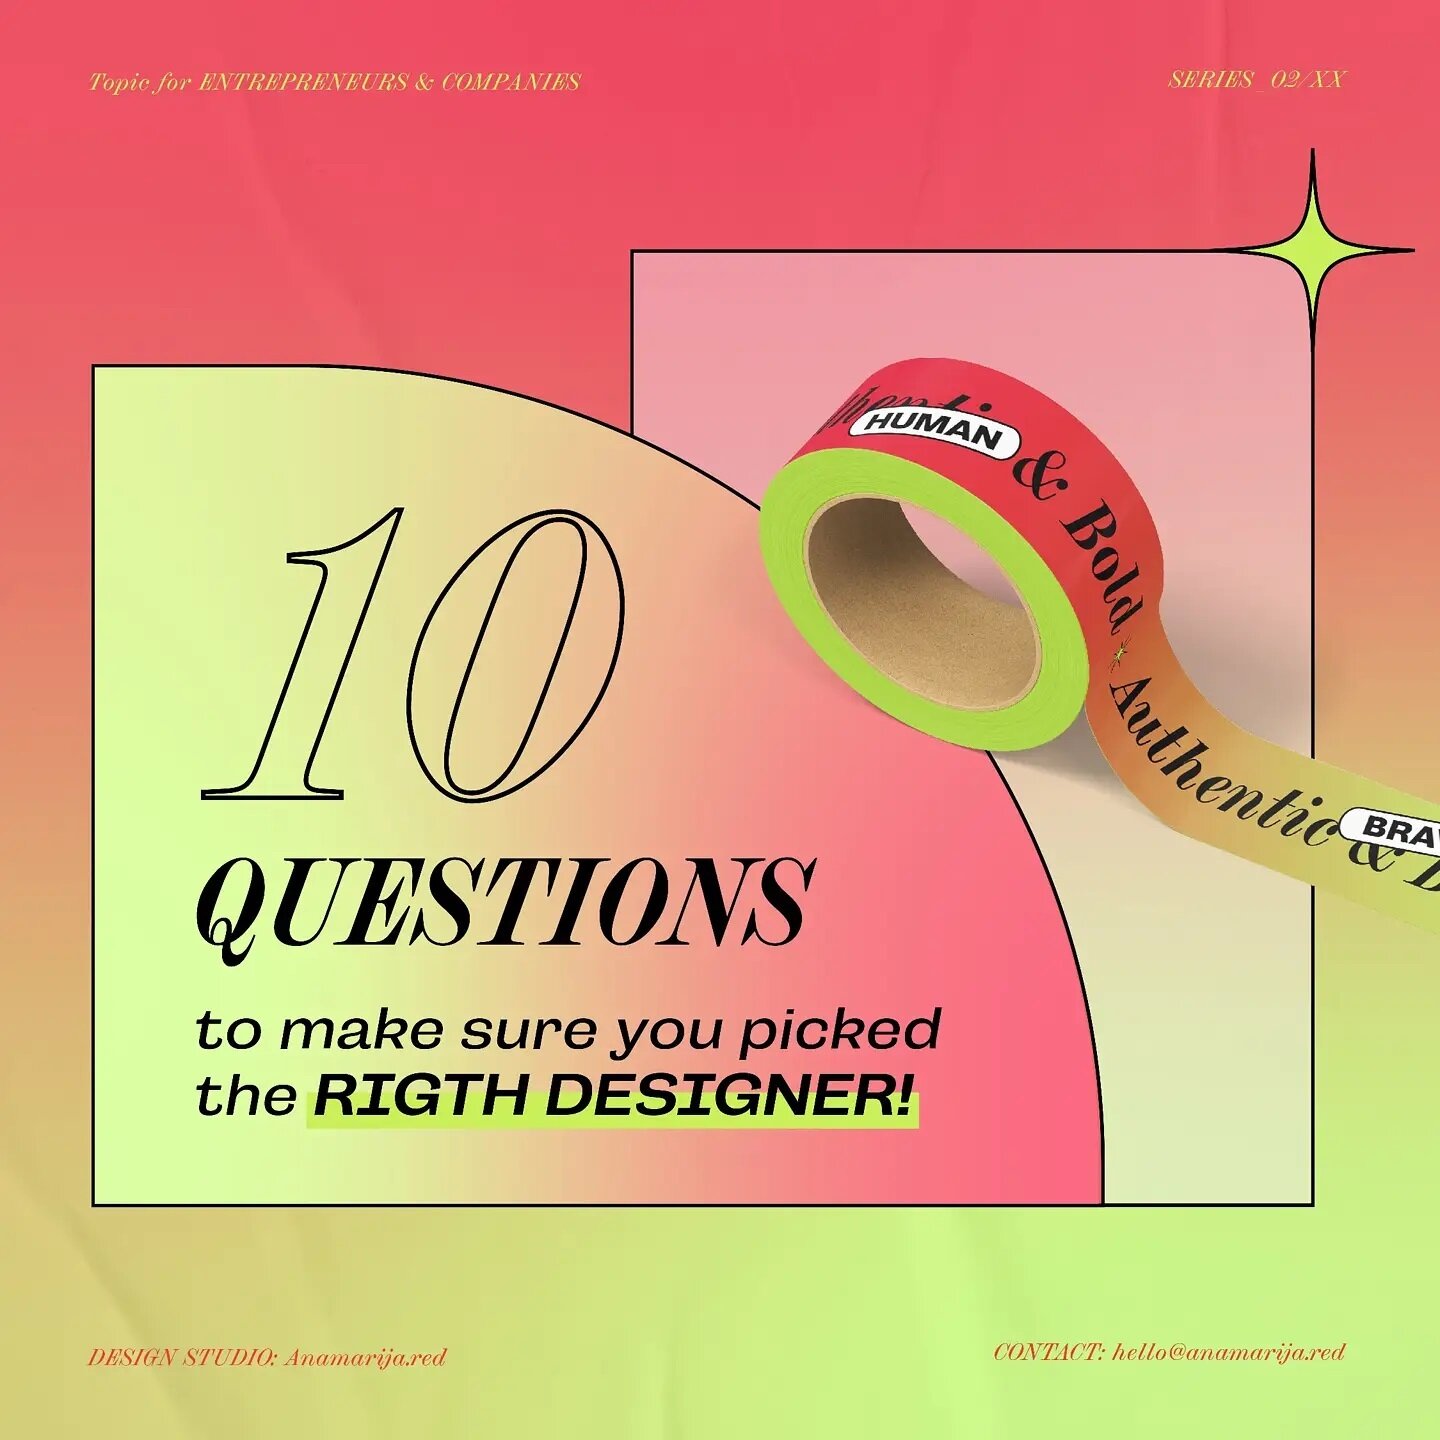 🔥QUESTIONS TO ask your designer to make sure you find the great one! 🔥

👉 Can I see your portfolio? 
👉 Can I know how your process looks like? 
👉 Can I read your client's reviews? 
👉 Can you provide me your general price list? 
👉 Can we see if